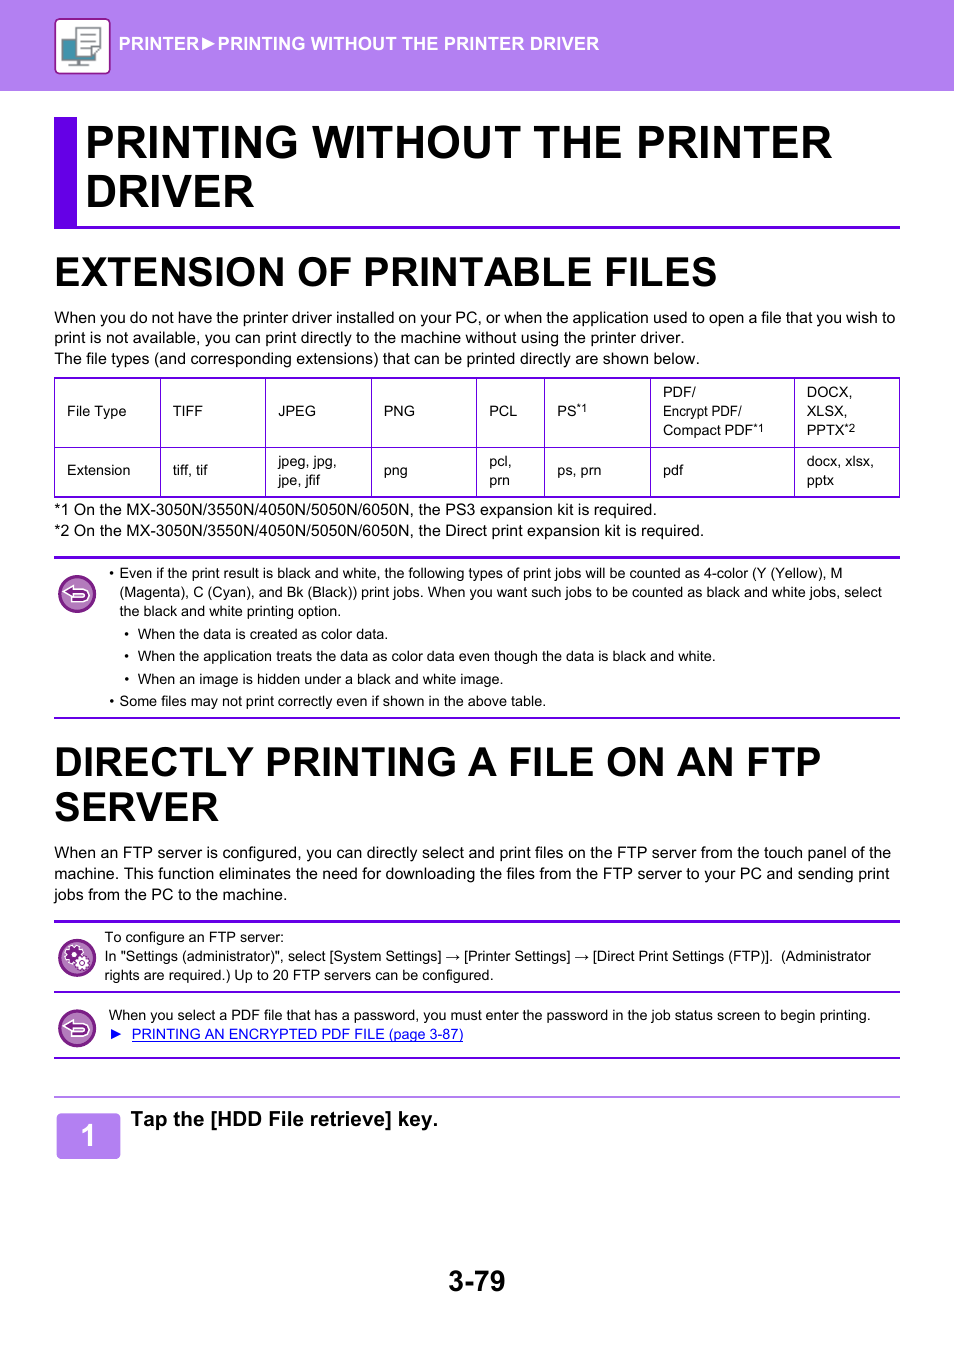 Printing without the printer driver, Extension of printable files -79, Directly printing a file on an ftp server -79 | Extension of printable files, Directly printing a file on an ftp server | Sharp MX-6070N User Manual | Page 386 / 935